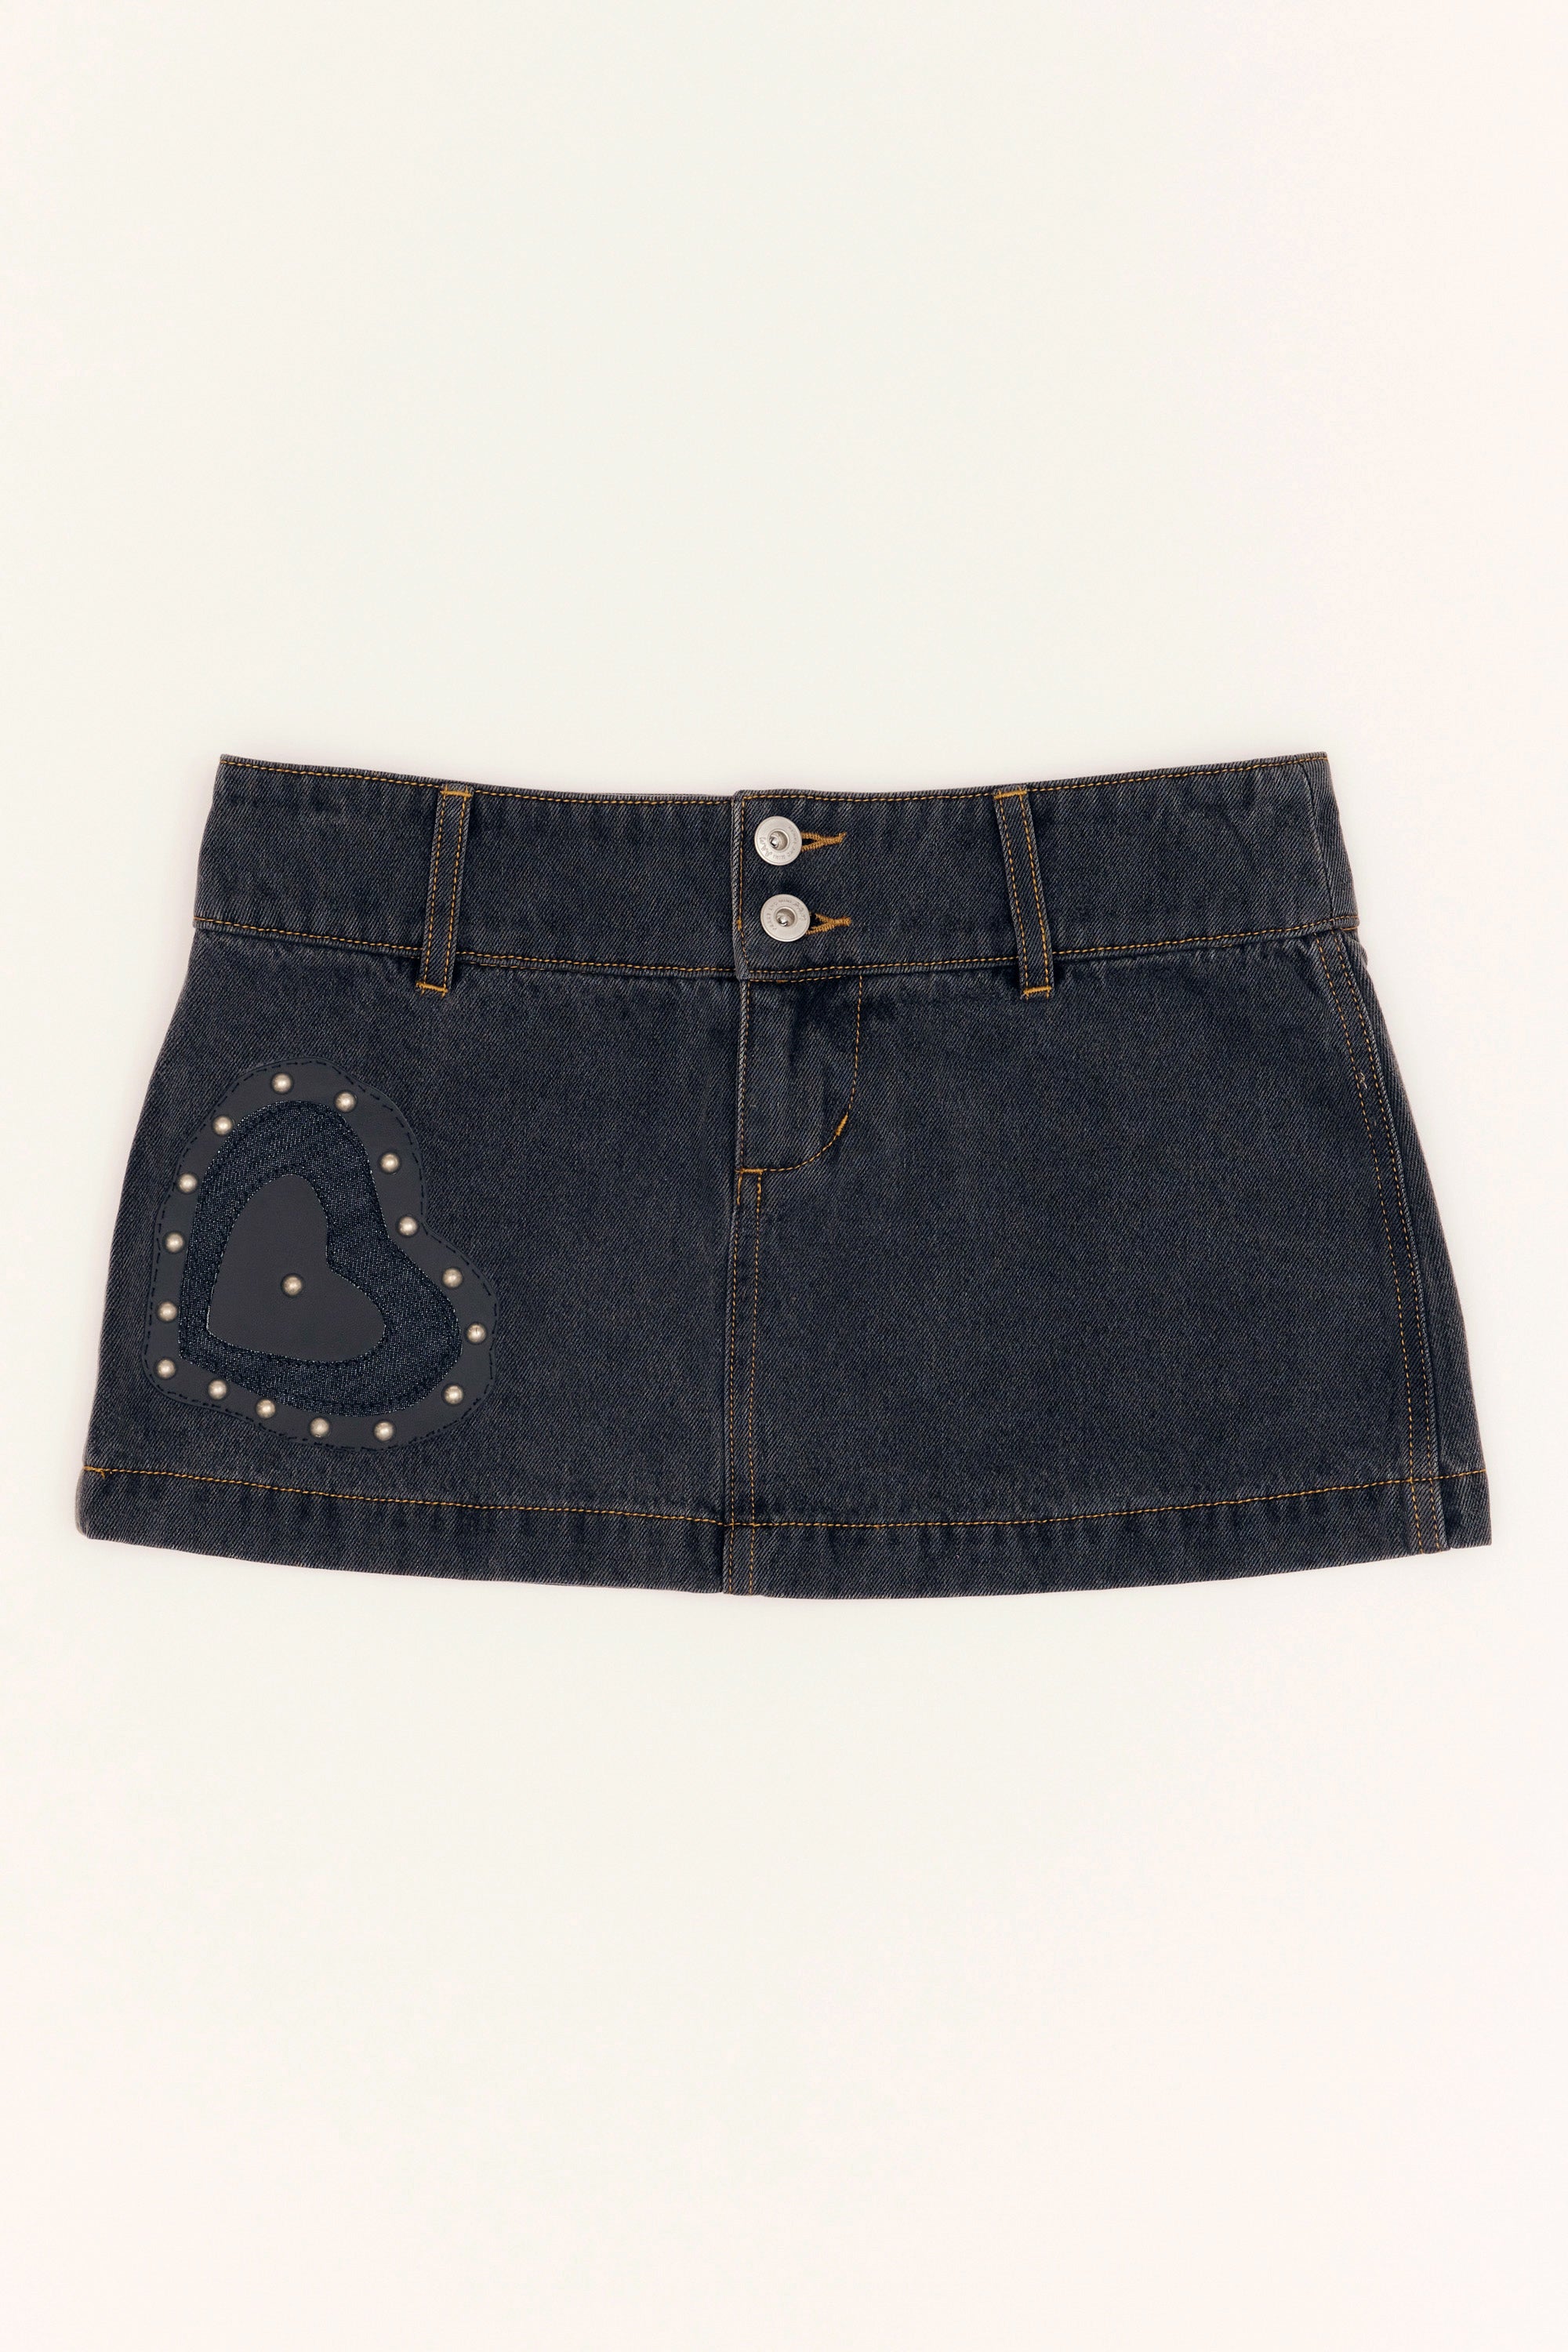 The GATEWAY DENIM MINI SKIRT  available online with global shipping, and in PAM Stores Melbourne and Sydney.